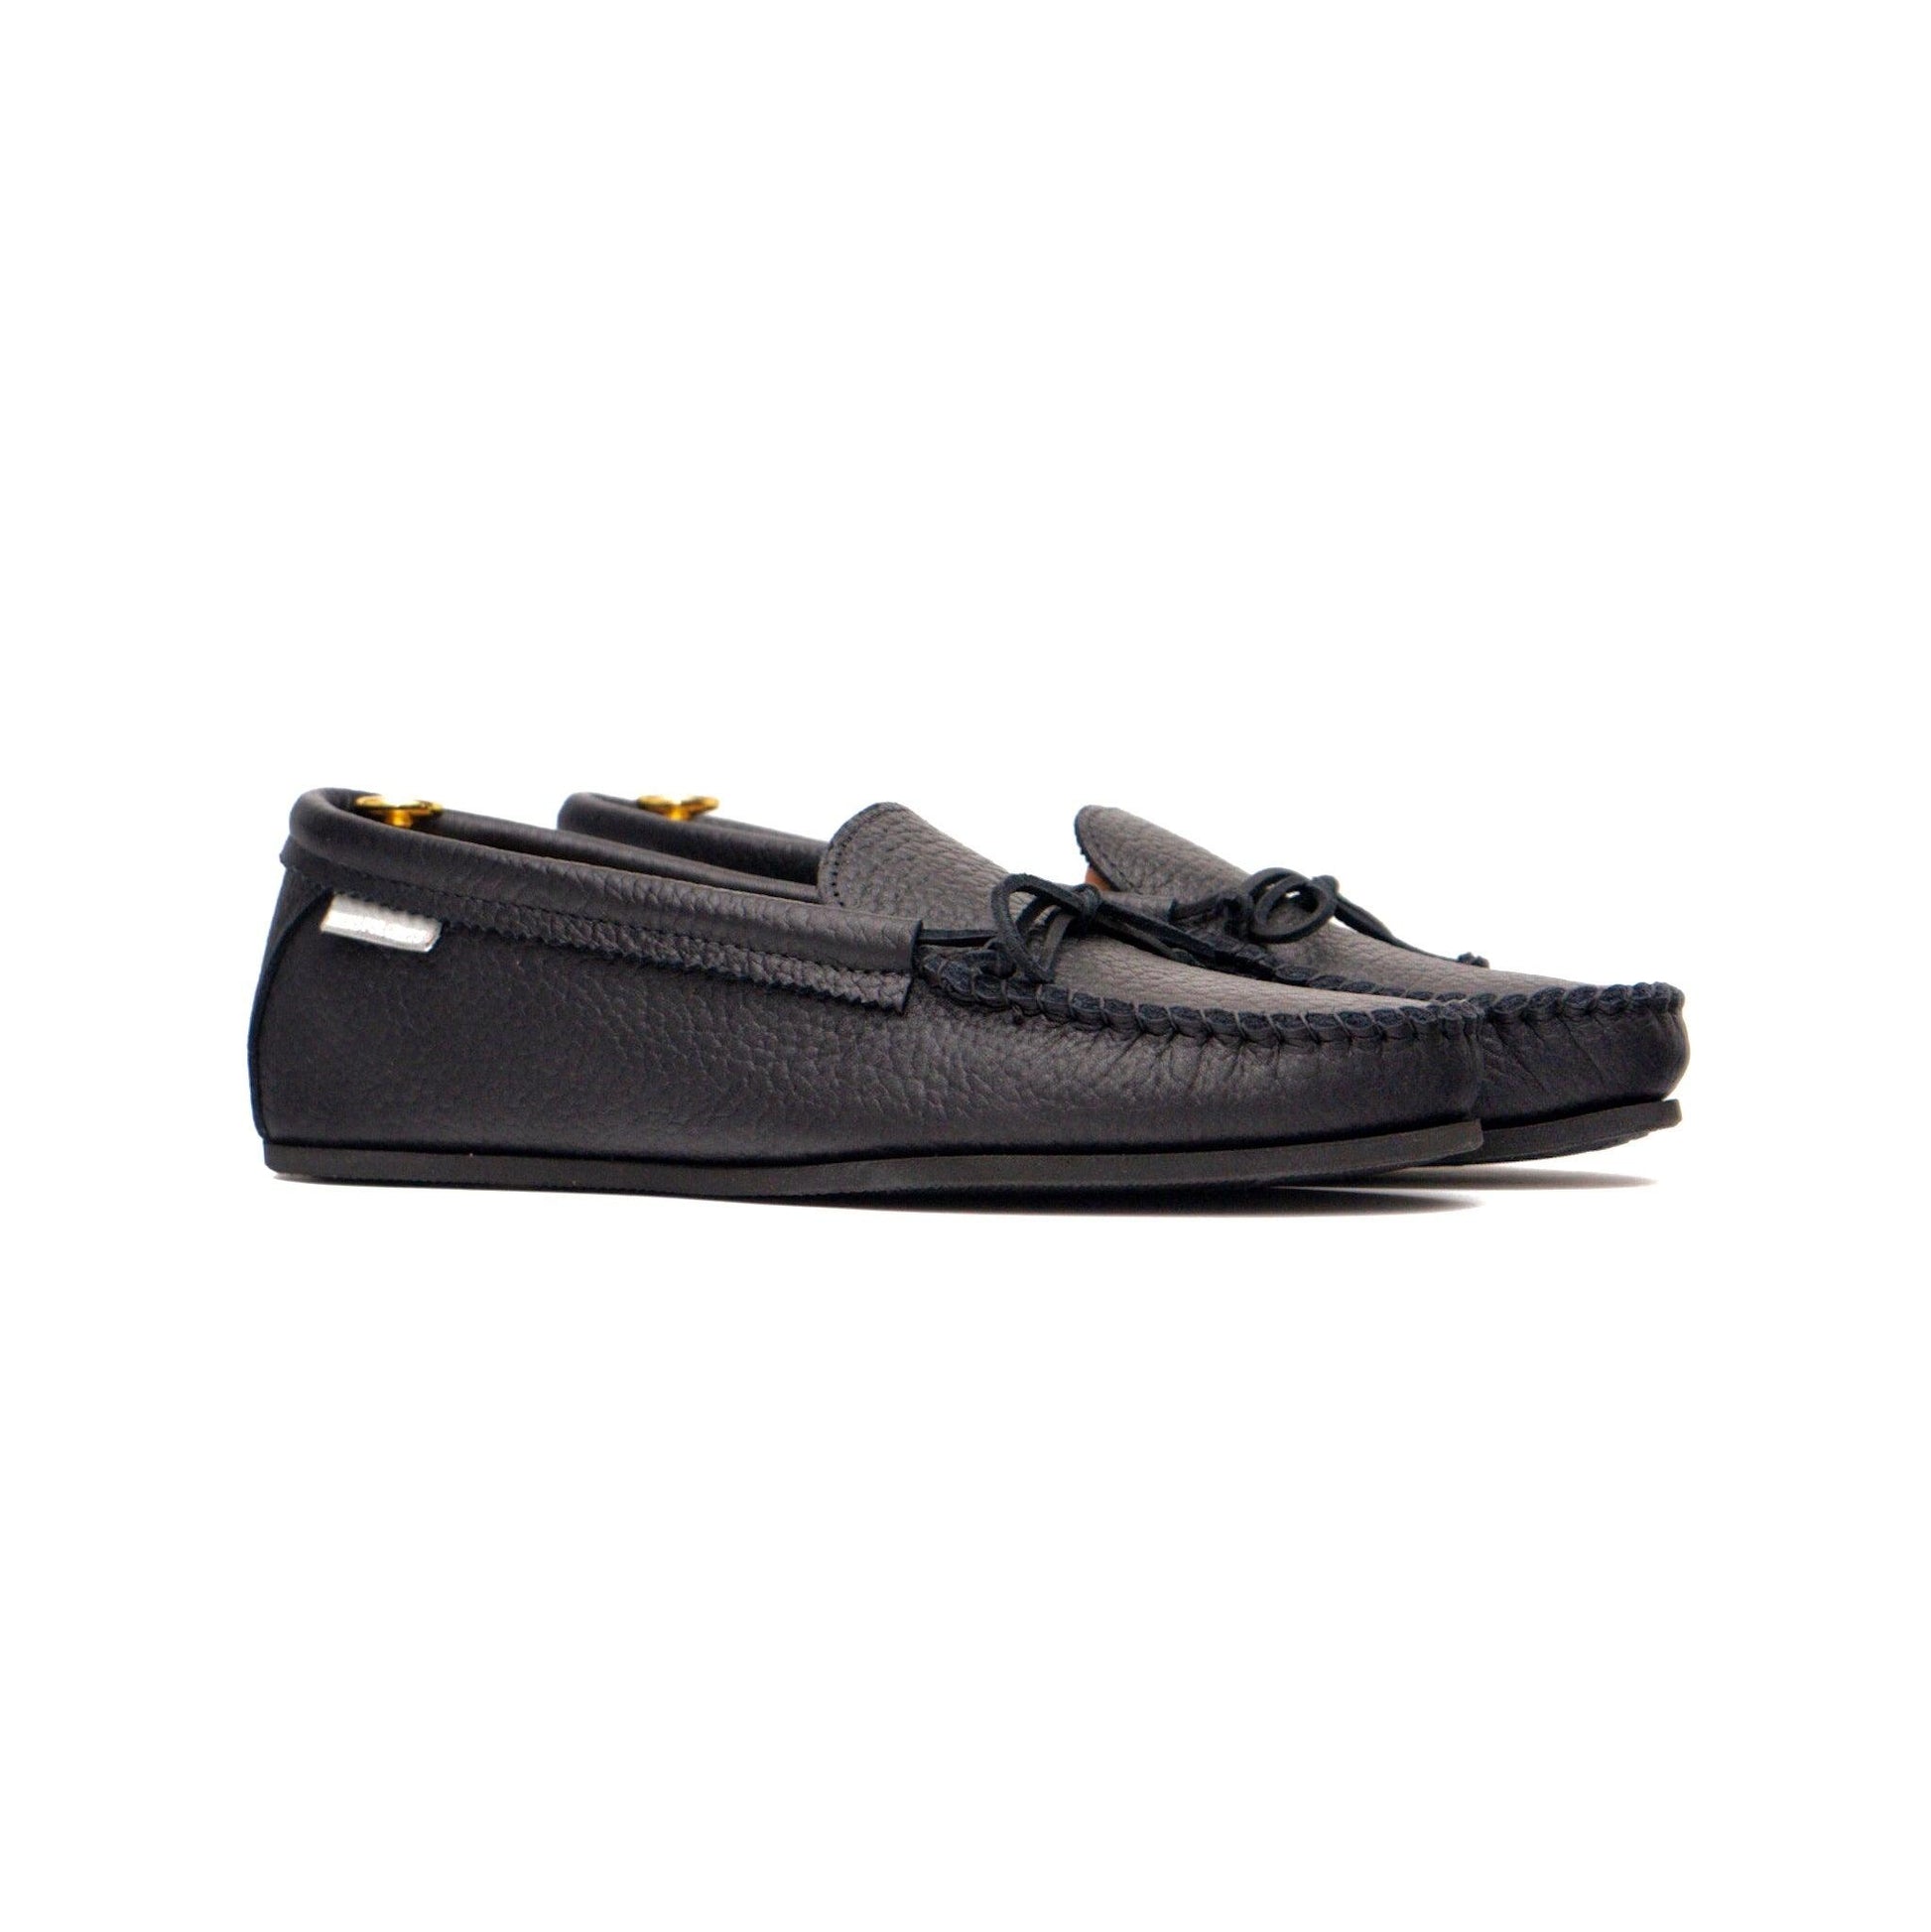 Spring Grove USA Moccasins - Black Cowhide - Kicks For Gents - Shoes - MADE IN USA, Sneaker